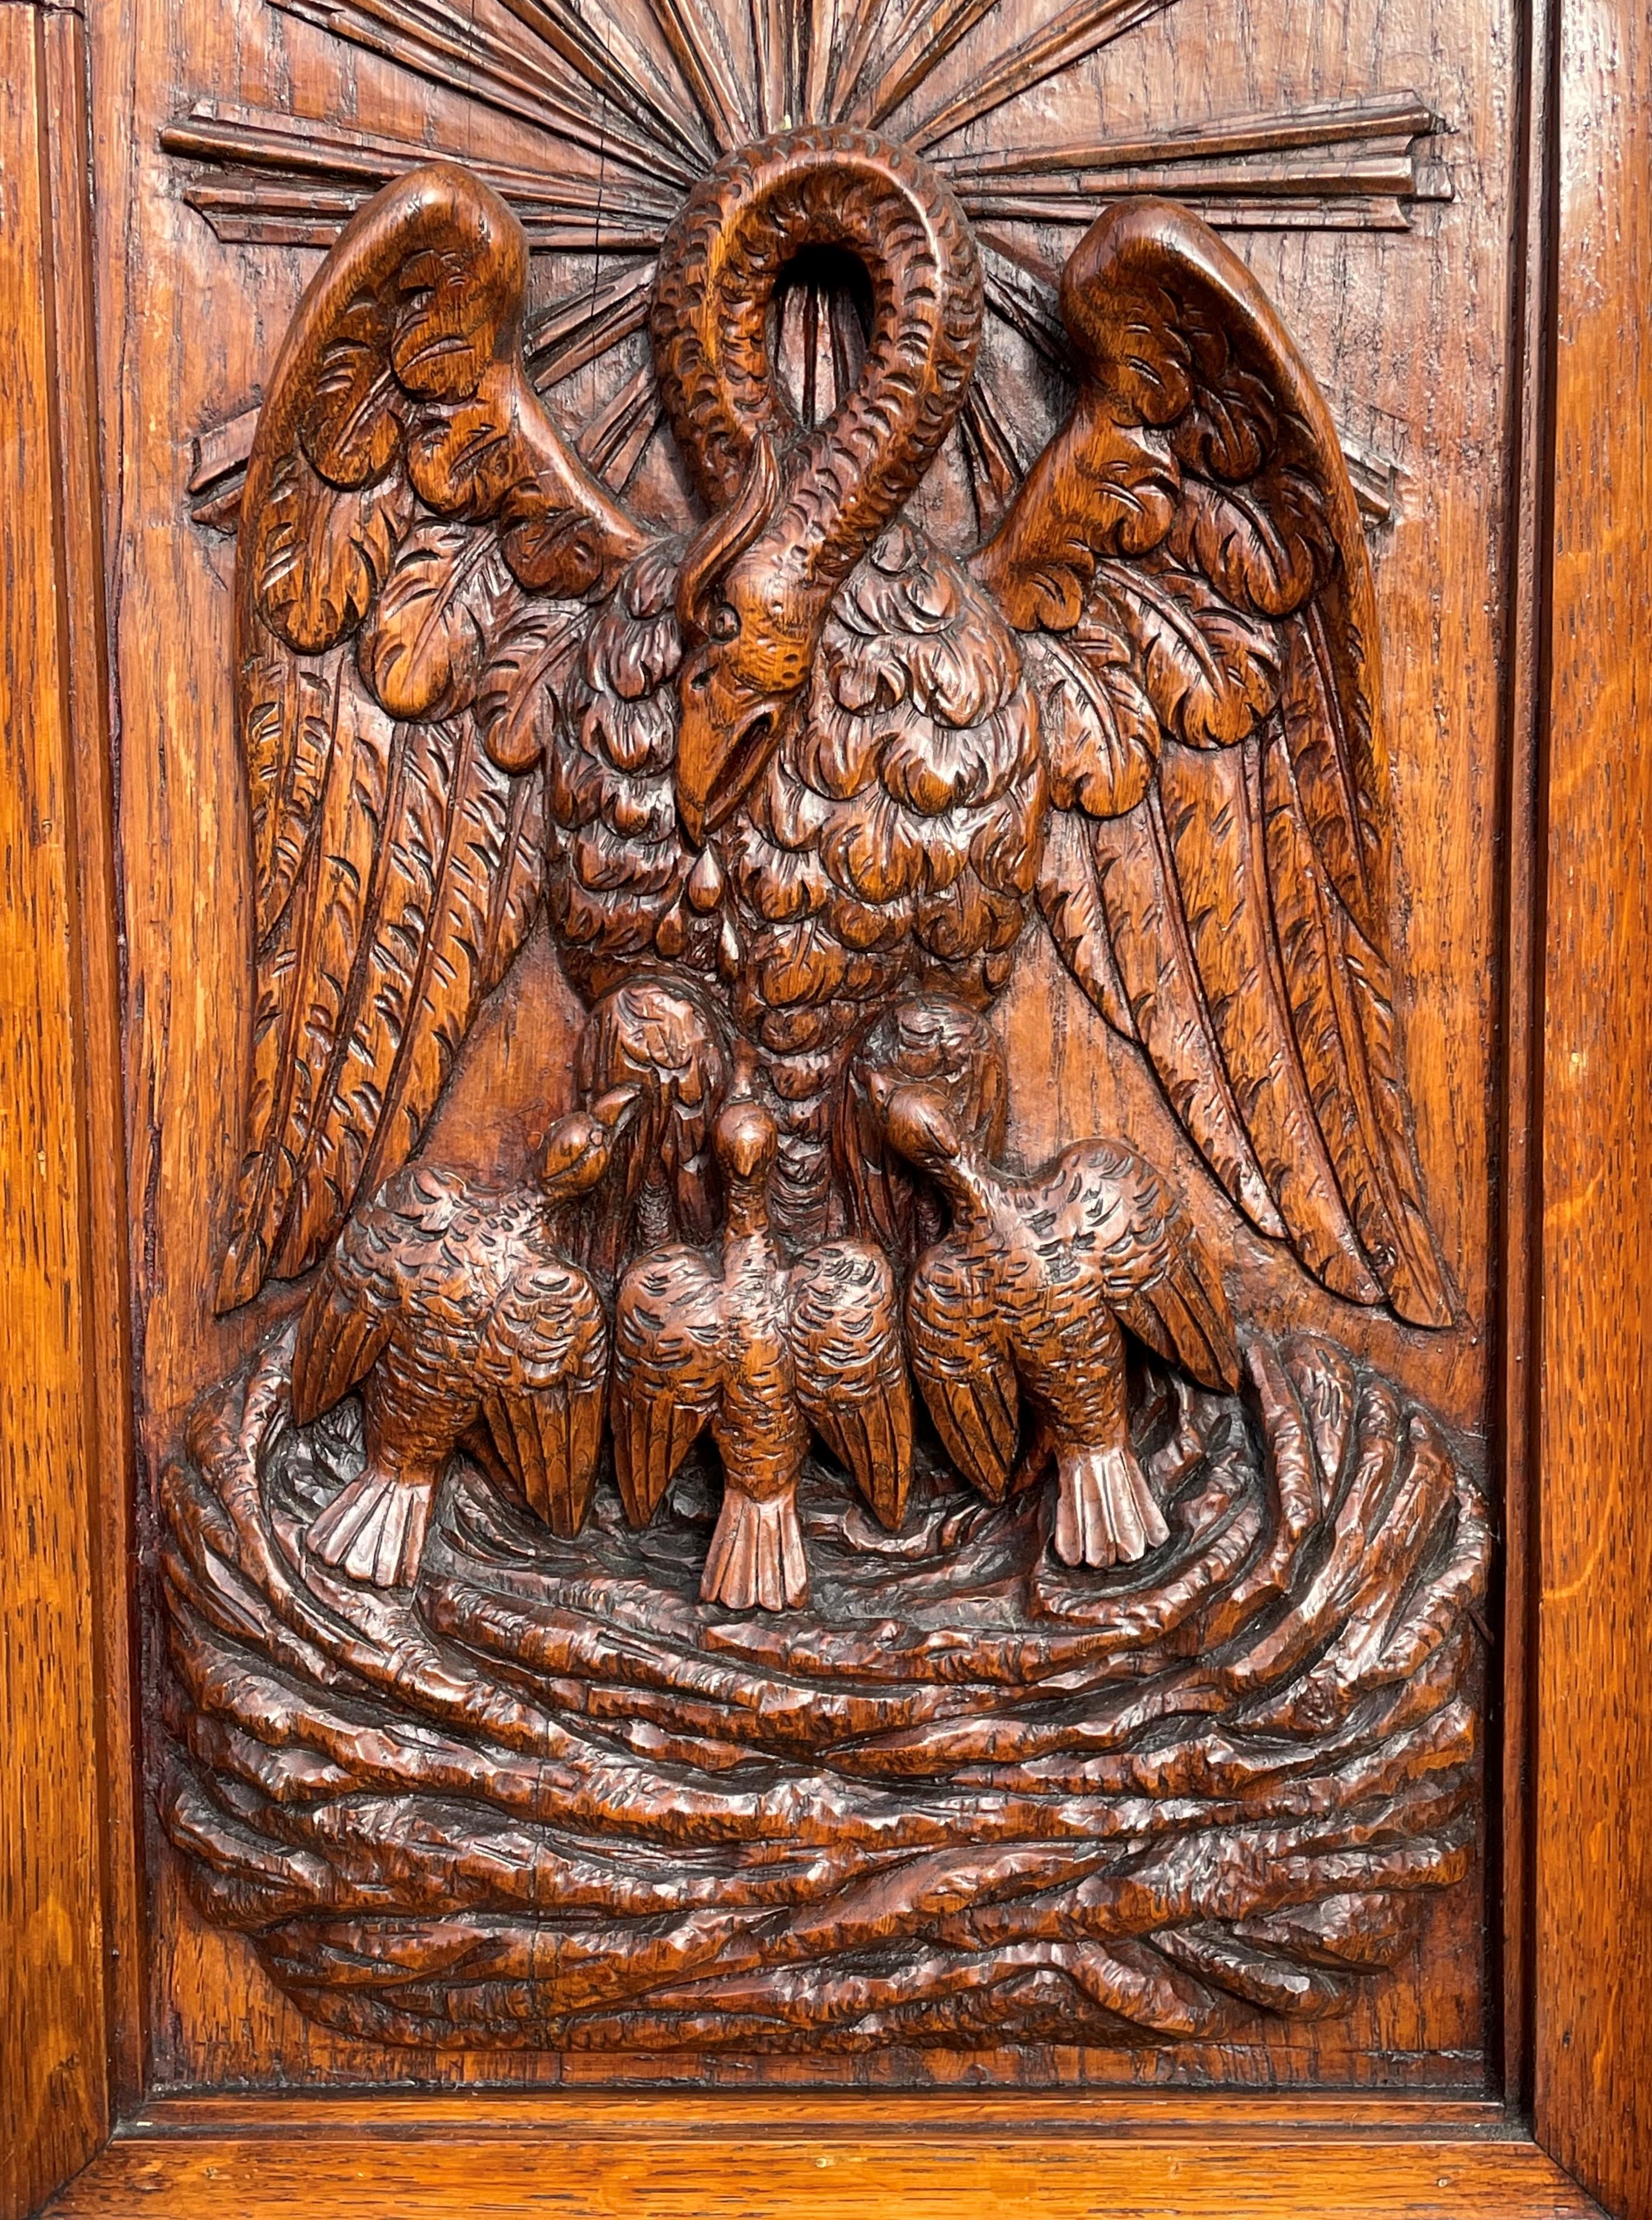 Gothic Revival Antique Hand Carved Gothic Church Panel of Feeding Pelican as Symbol of Christ